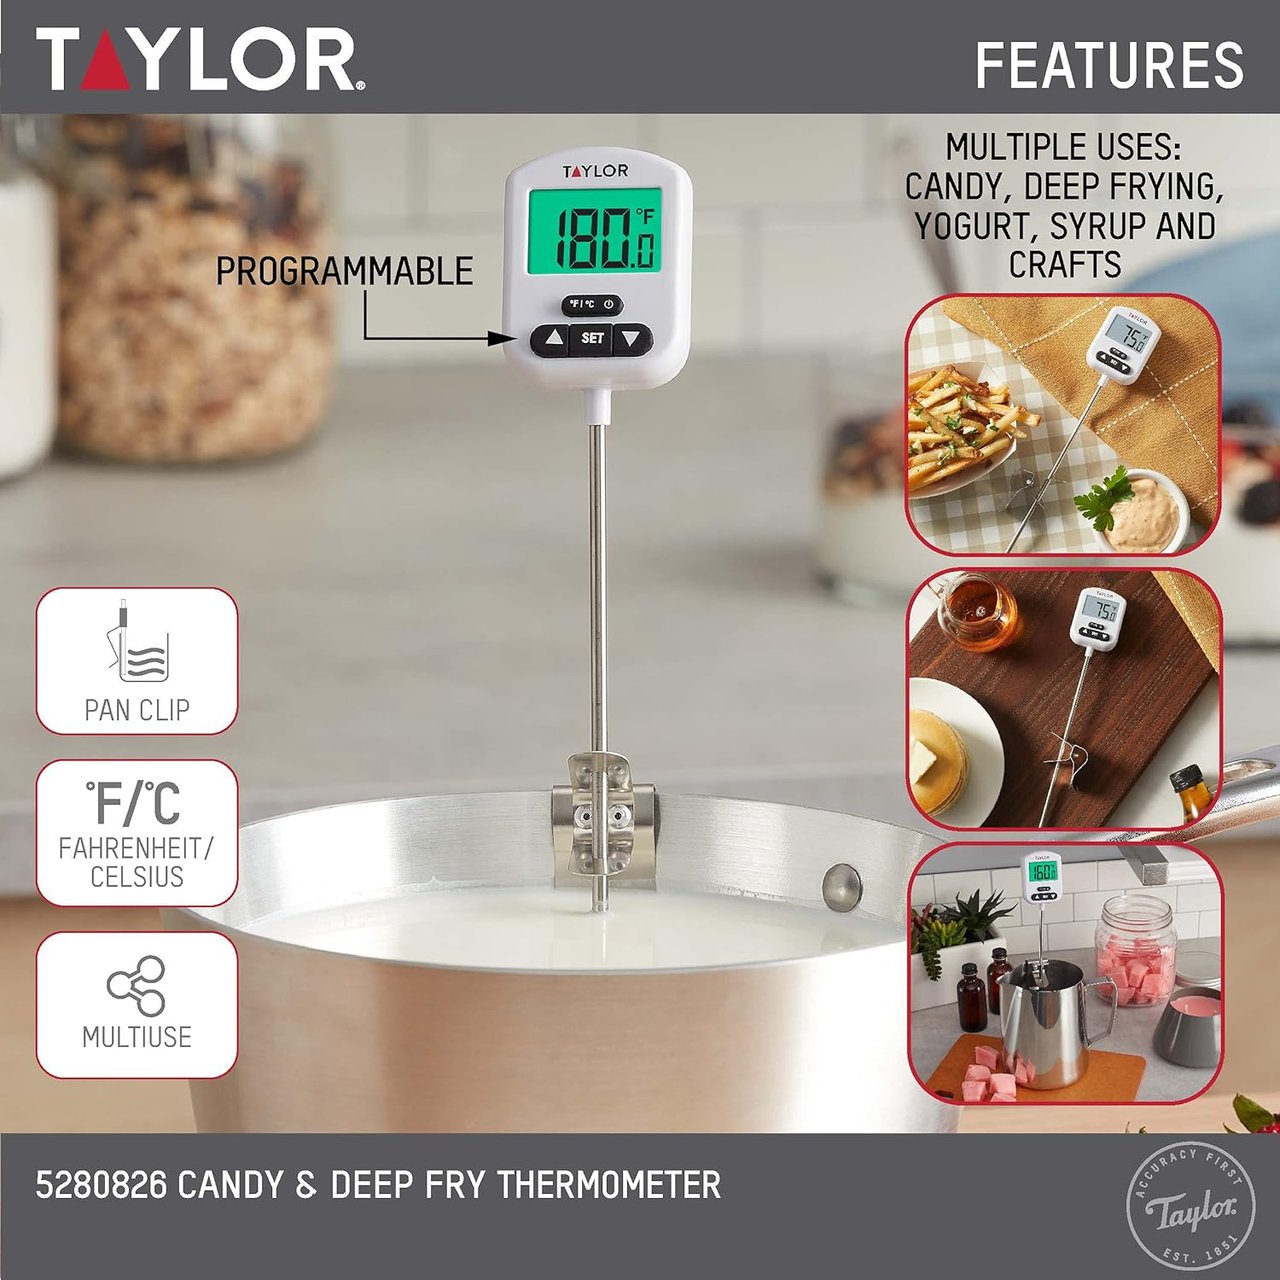 1 Taylor Programmable Digital Candy and Deep Fry Thermometer with Green Light Alert Display and Adjustable Pan Clip